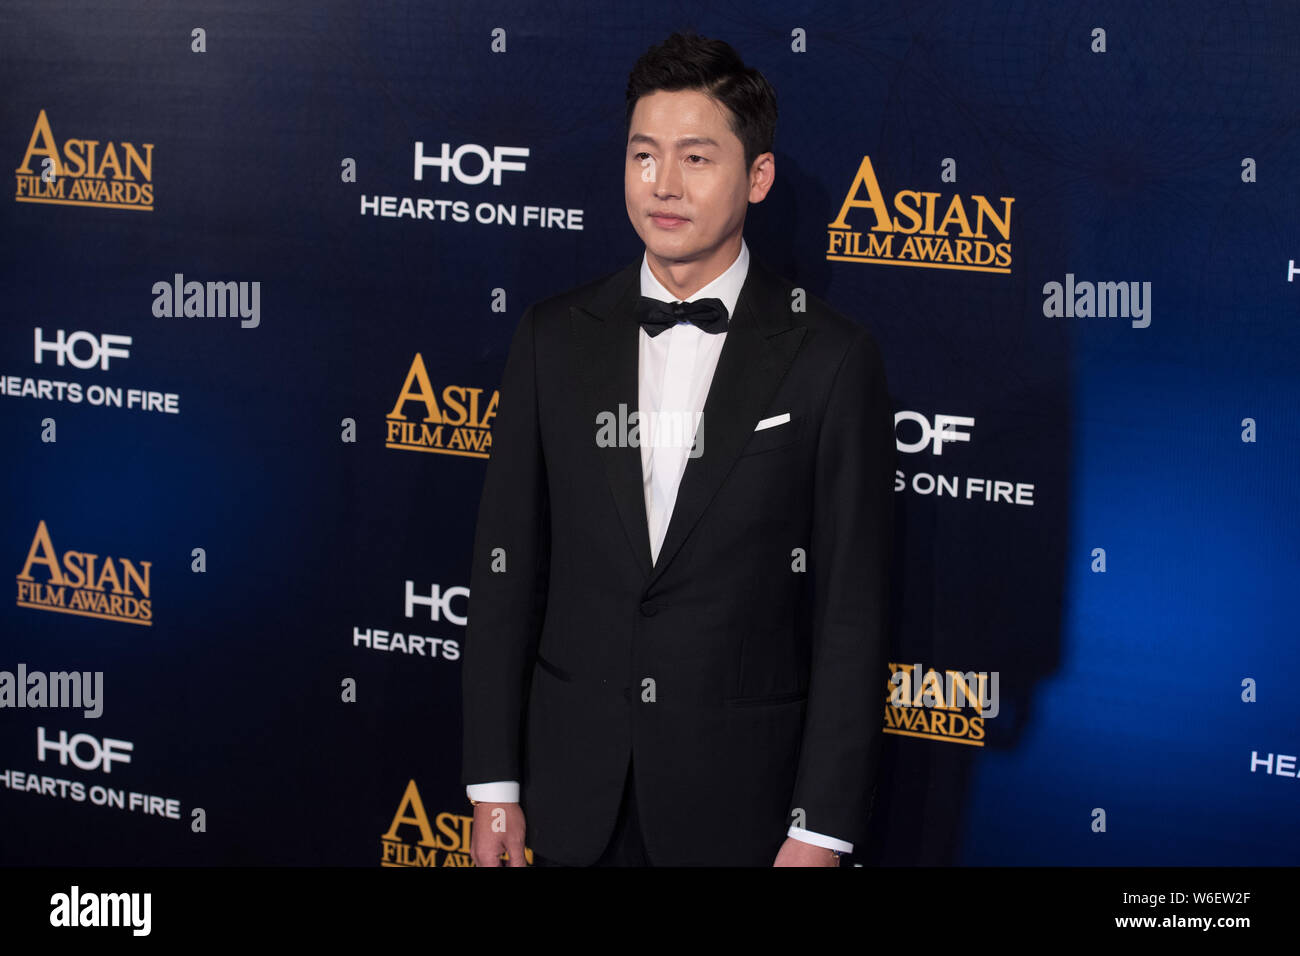 South Korean actor Lee Jung-jin poses as he arrives on the red carpet for the 12th Asian Film Awards in Macau, China, 17 March 2018. Stock Photo